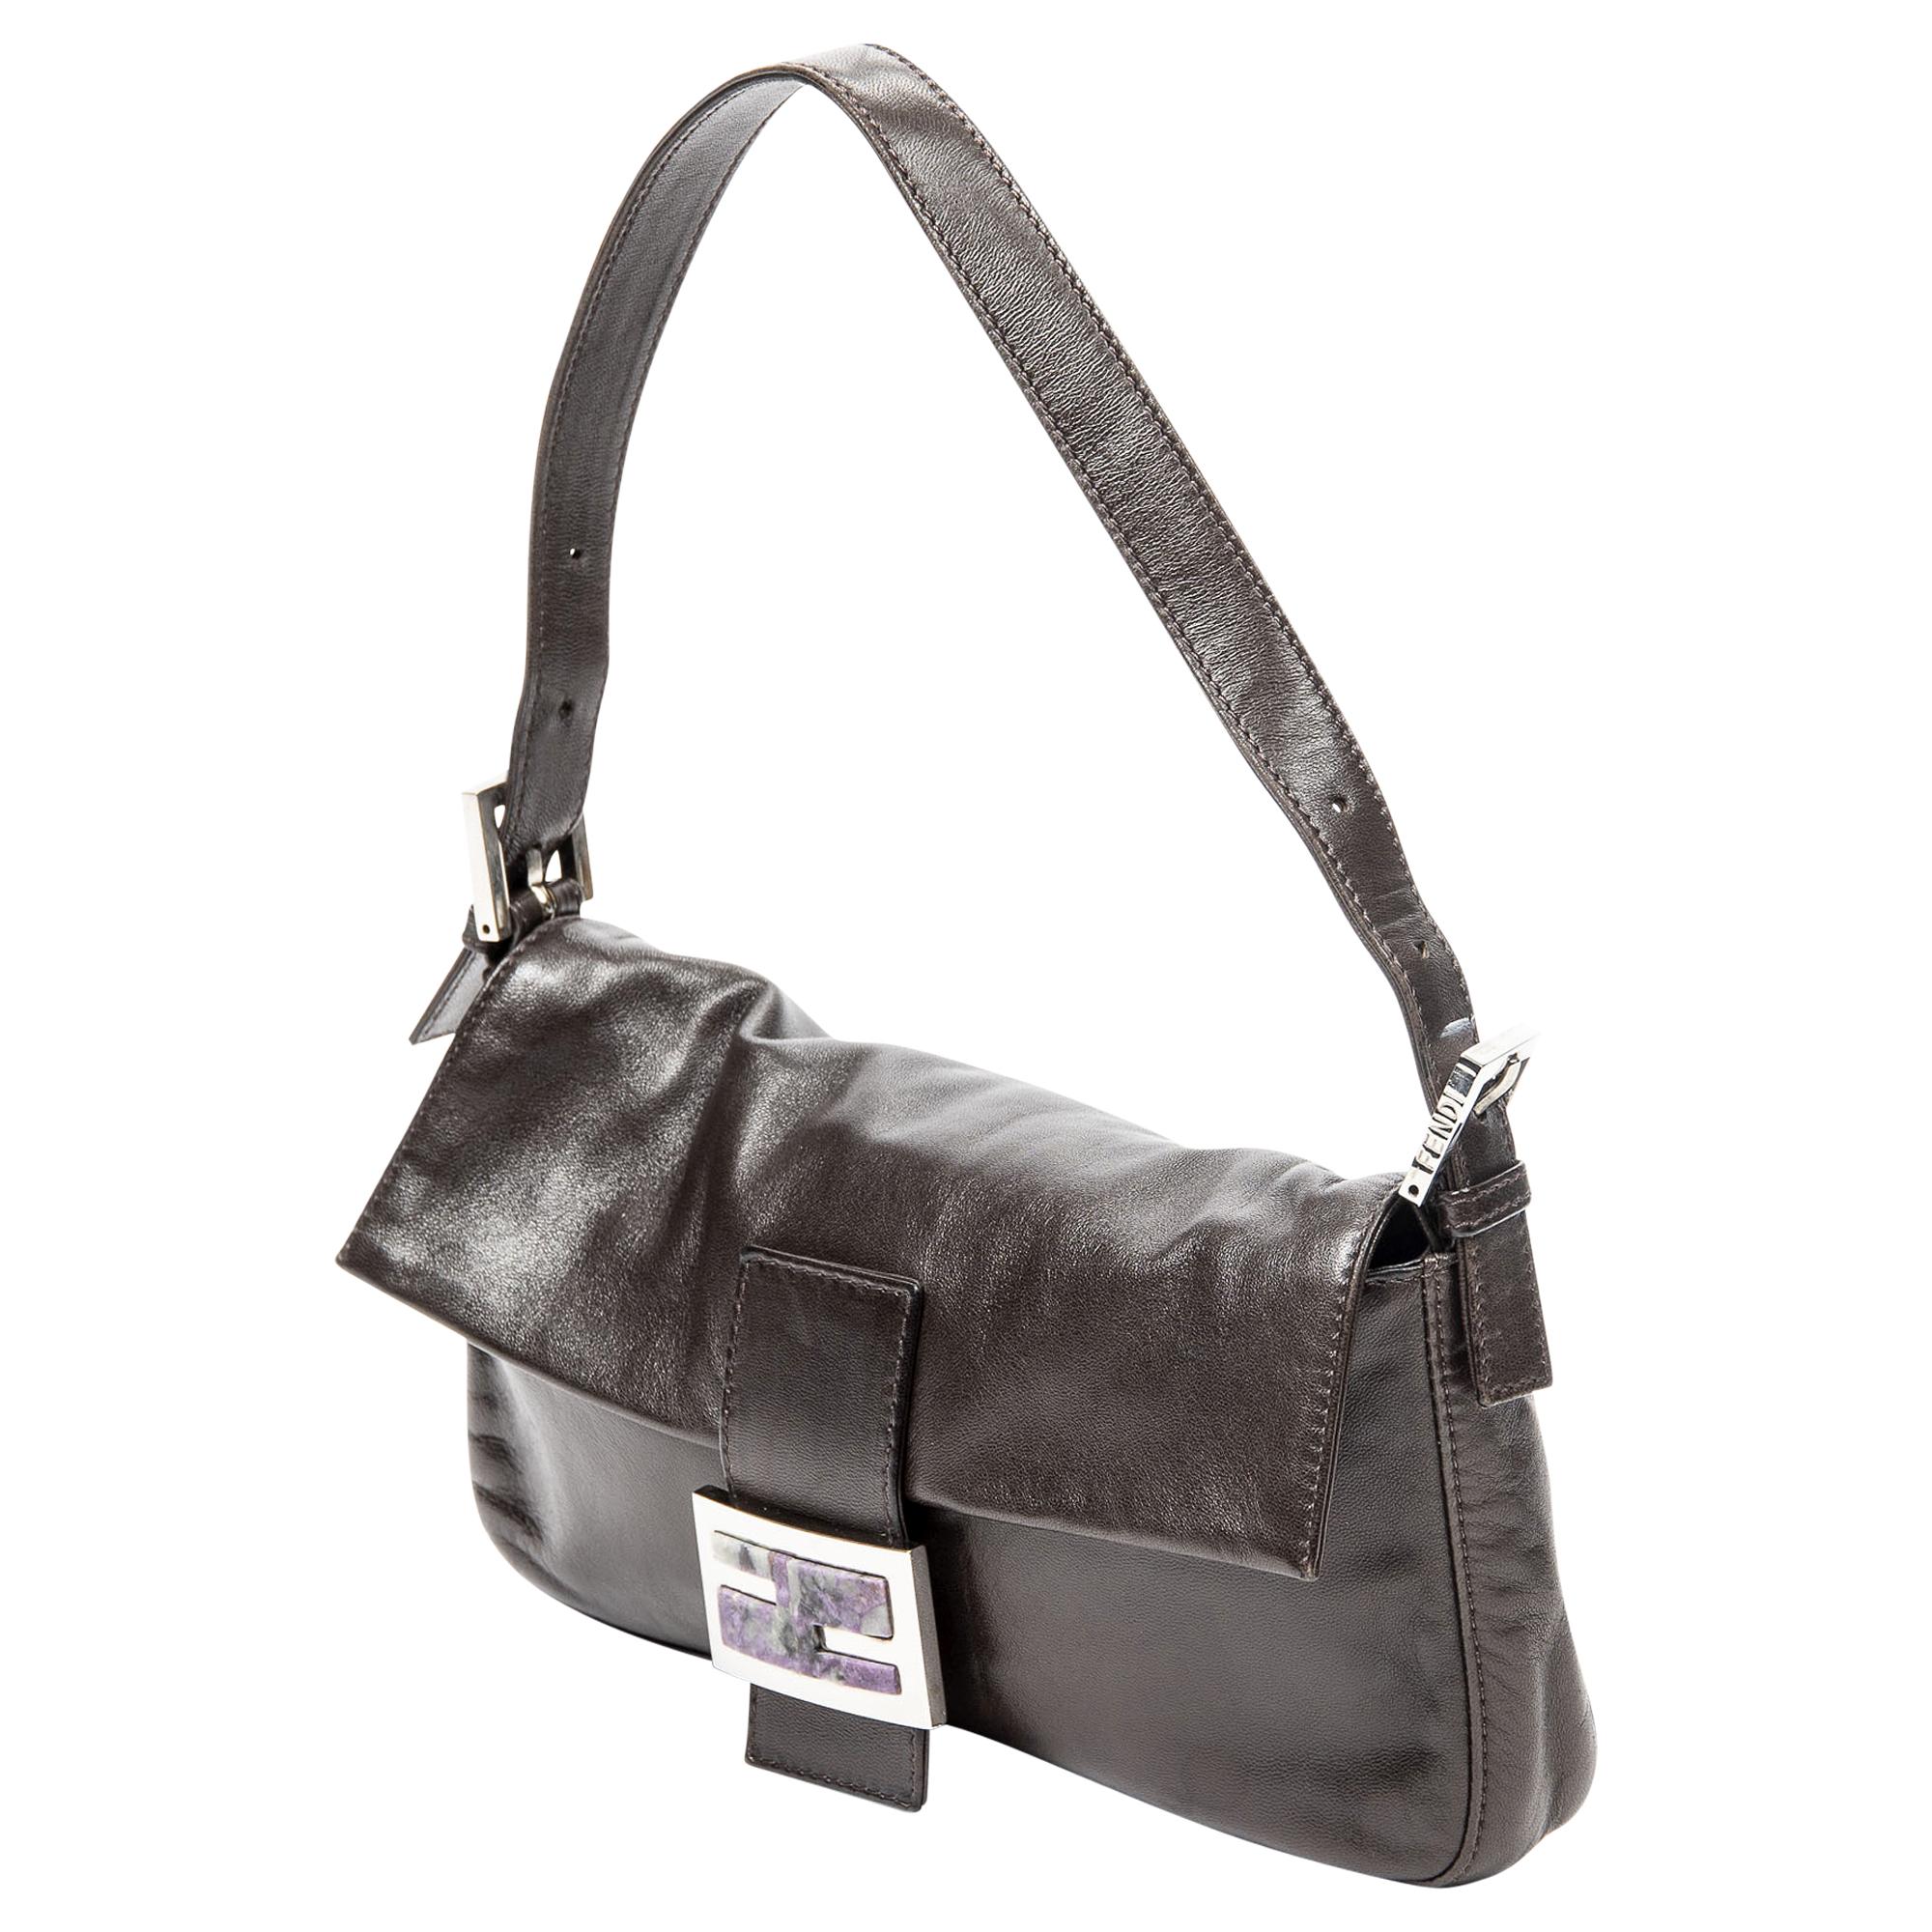 Elevate your look with the Mocha Muse Shoulder Bag. Crafted from luxurious dark brown calfskin leather, its smooth texture exudes sophistication. Adorned with sleek silver hardware, it features a practical magnetic snap closure for easy access.